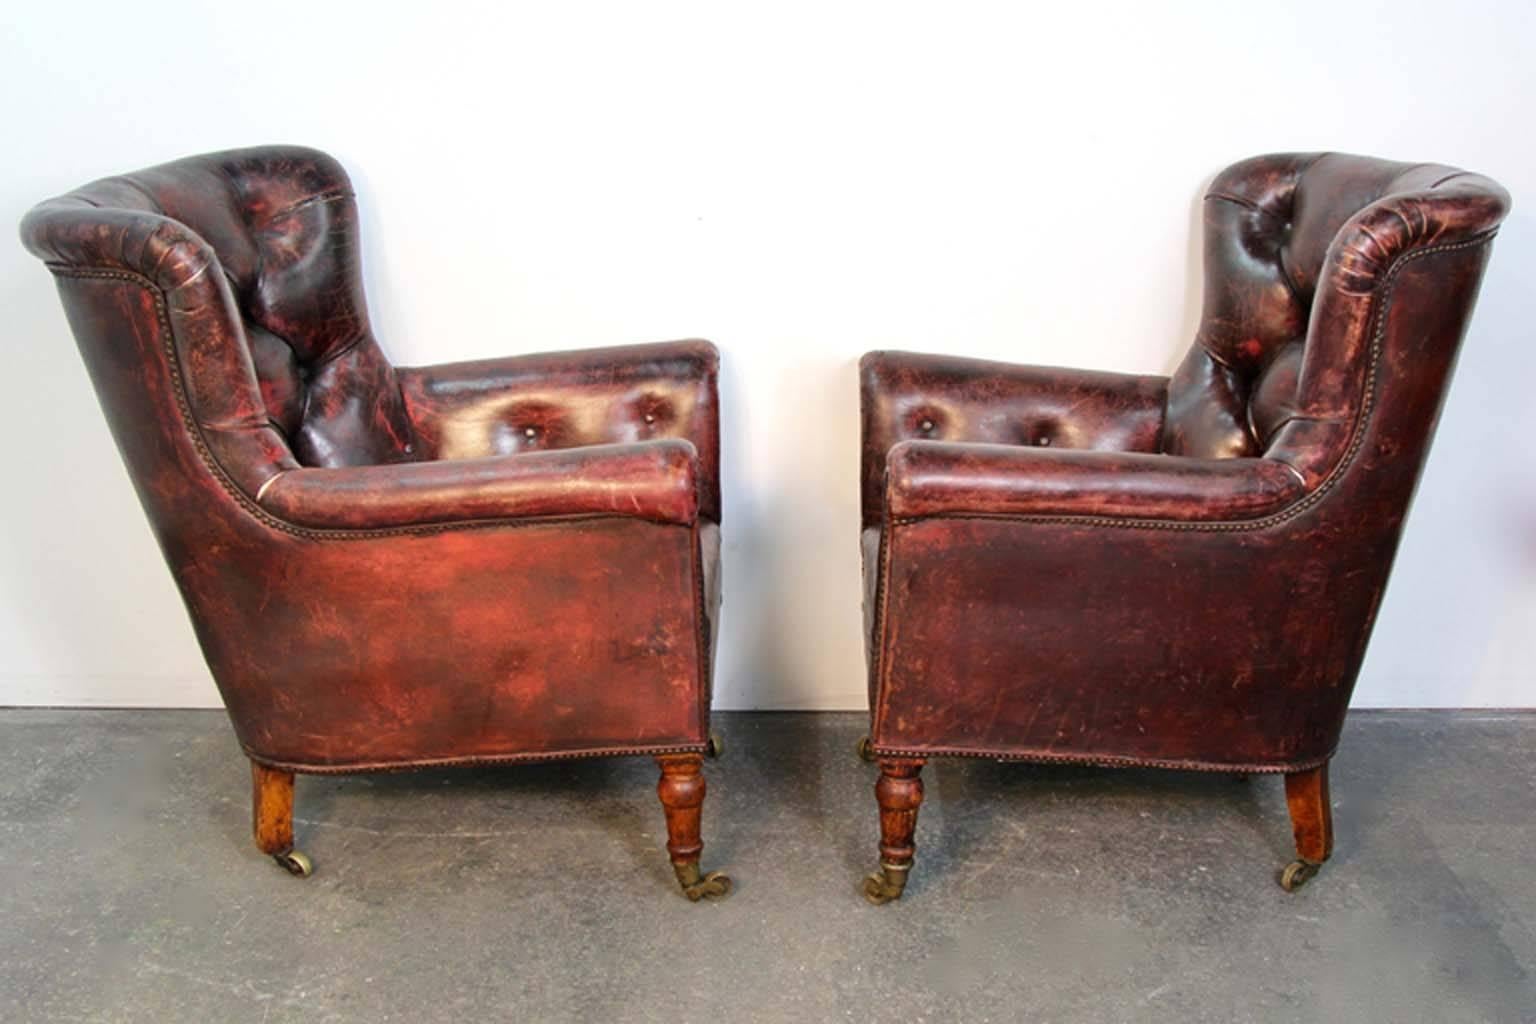 Stunning pair of antique 19th century leather club armchairs. Nailhead trim. Original tufted leather worn to fabulous patina. Brass castors. Turned front legs.